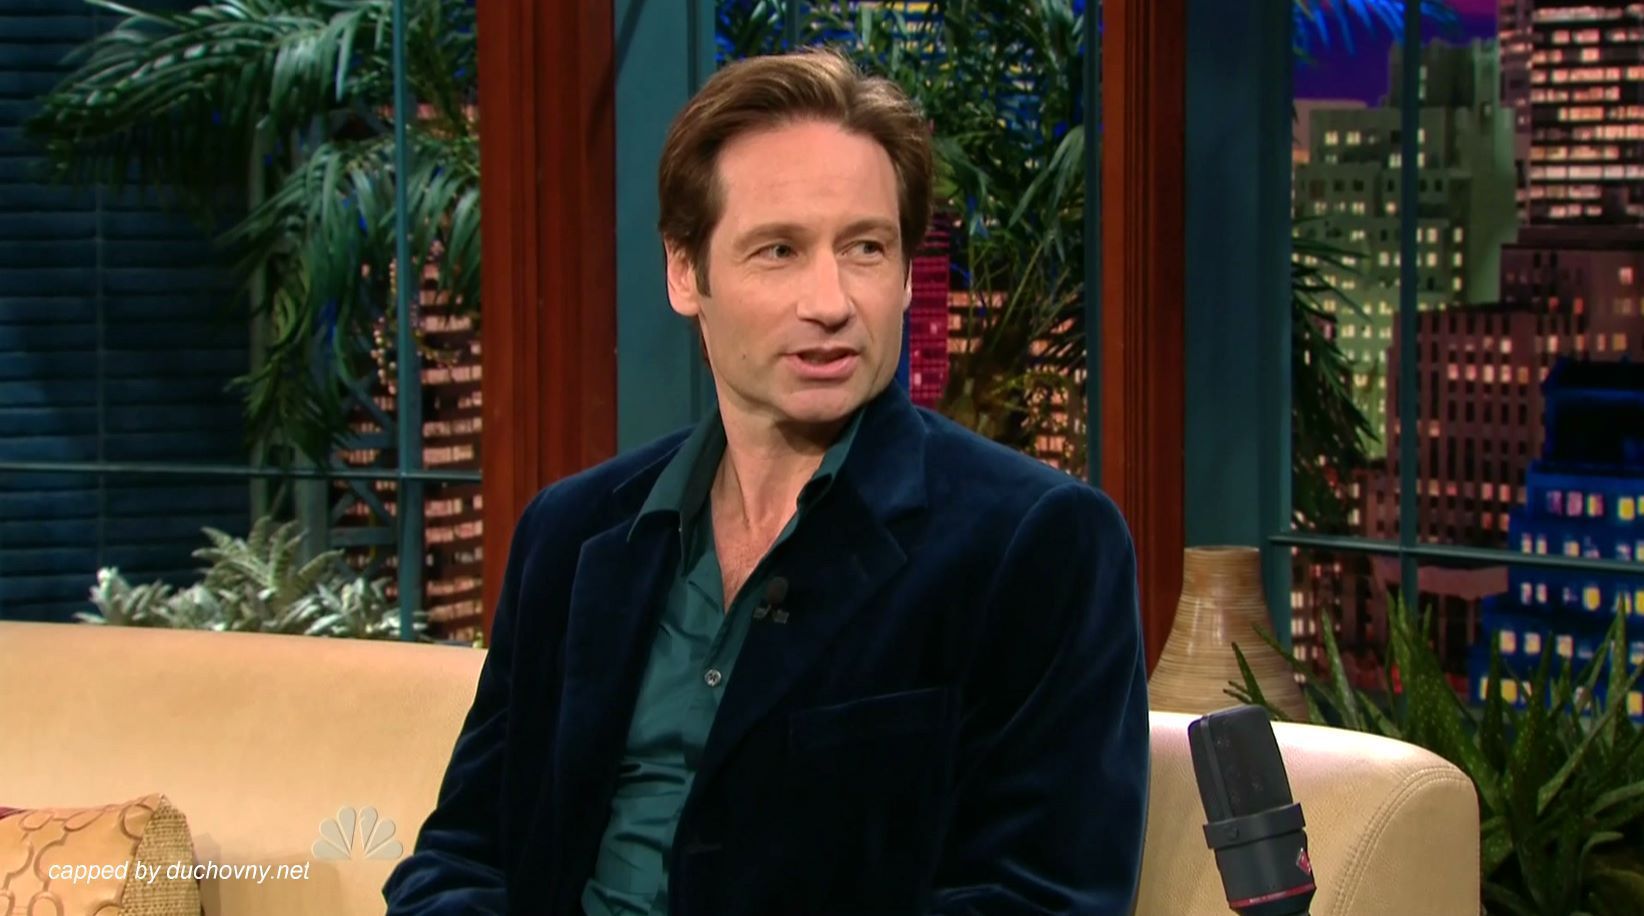 David Duchovny Images on Fanpop.